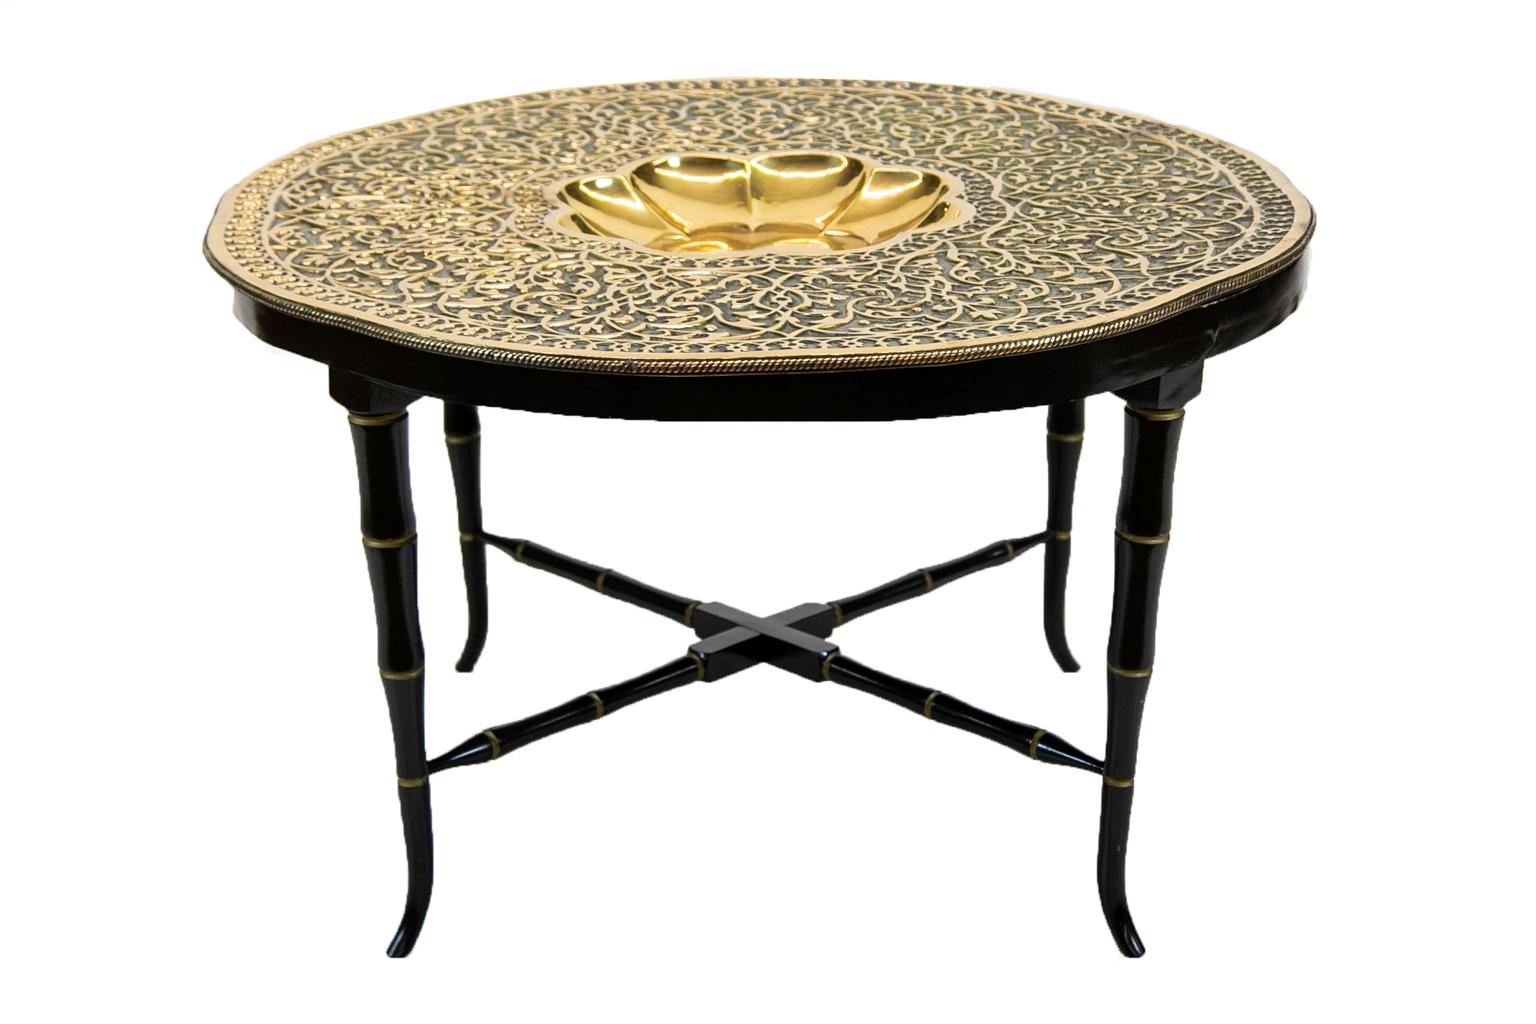 Mediterranean brass tray table is cast with profuse arabesques stamped in high relief. The center has a recessed octagonal stylized flower. The base was custom made in 1995.